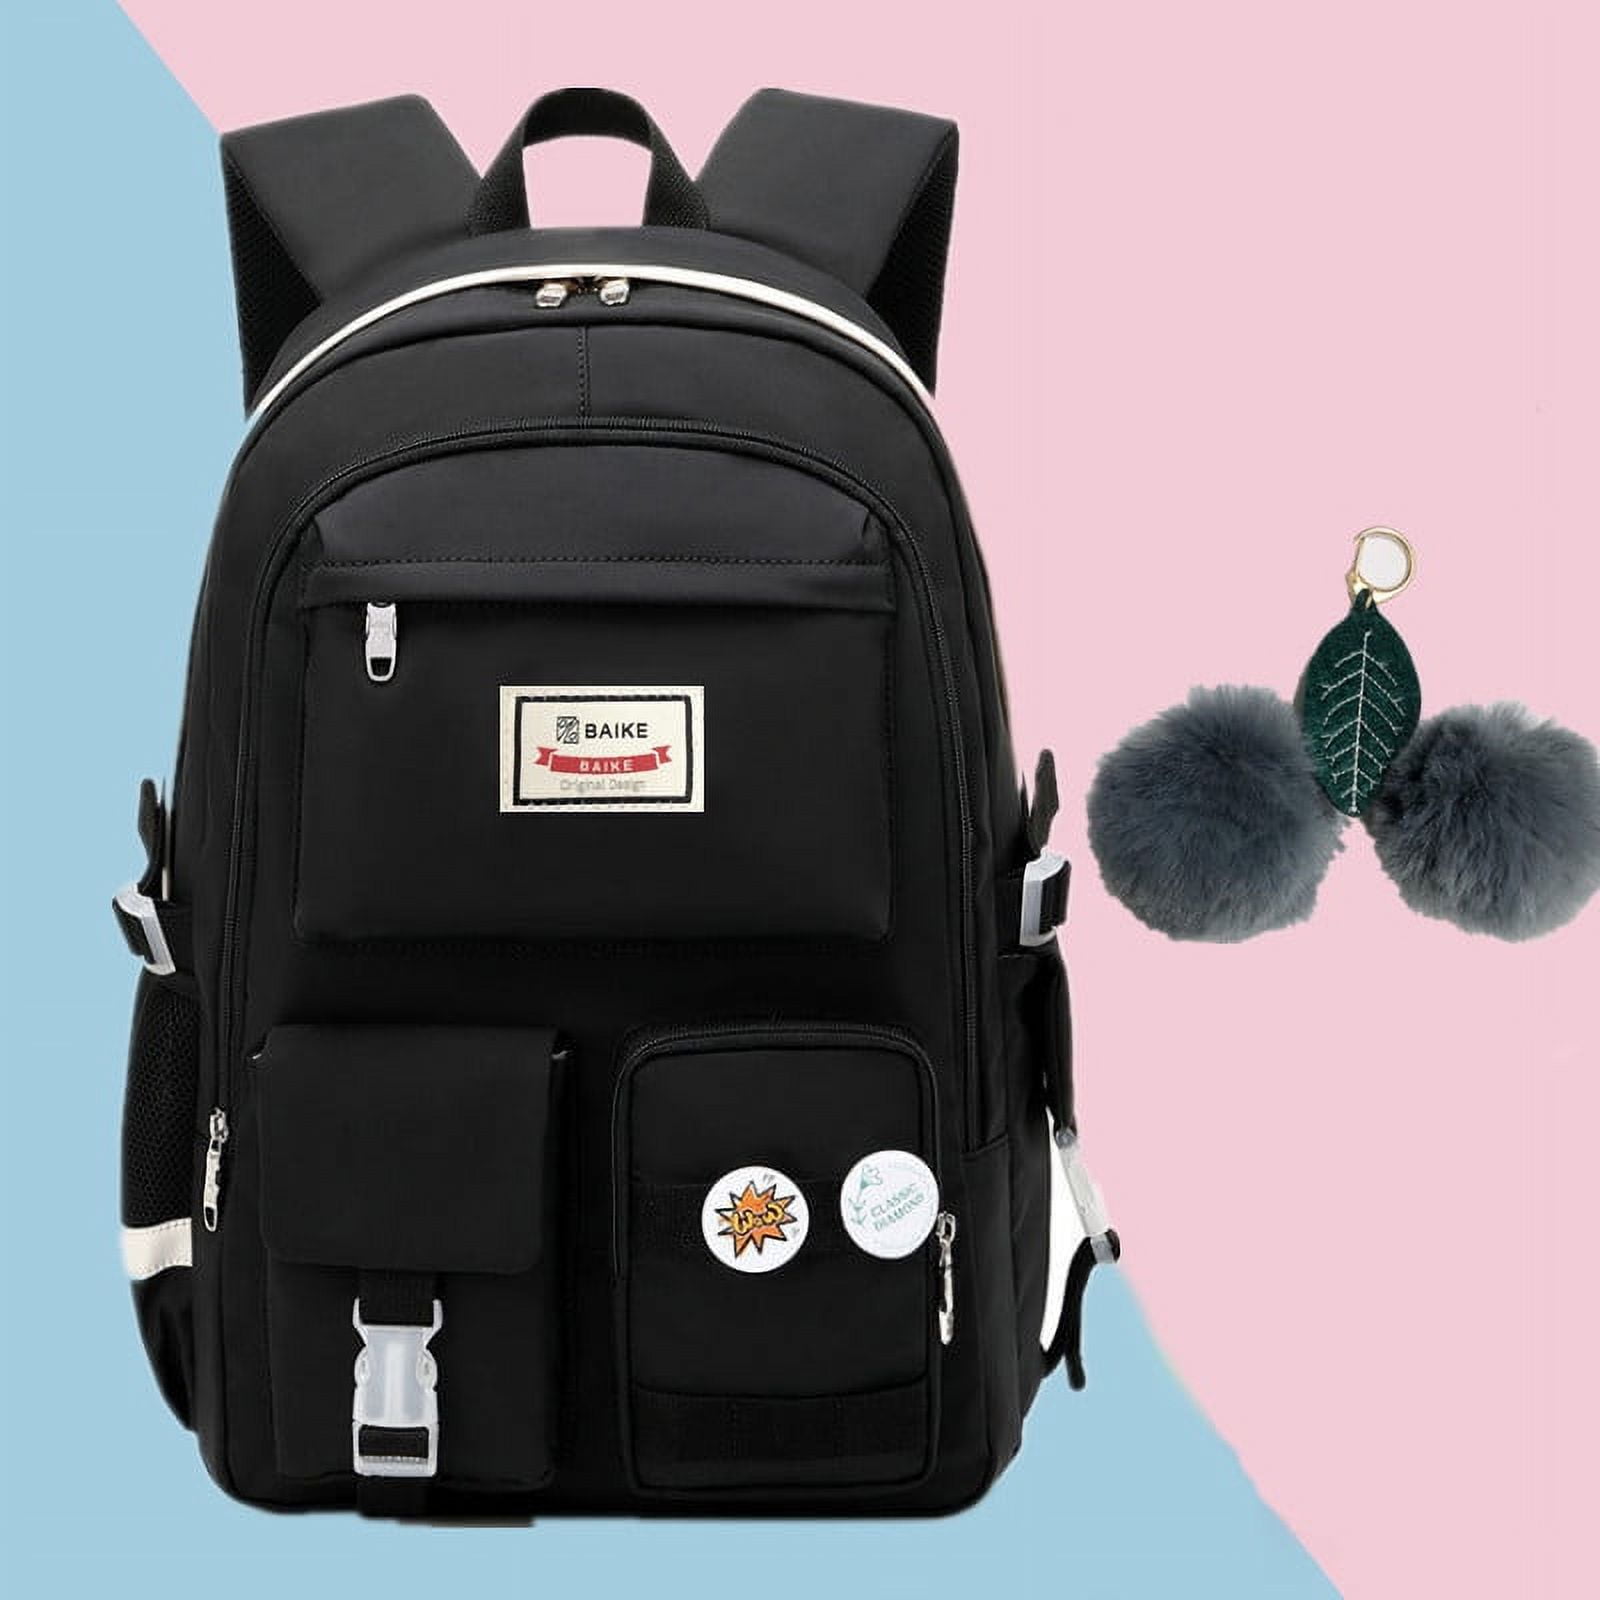 These Laptop Bags Under $50 Will Make You Enjoy Going to School & Work